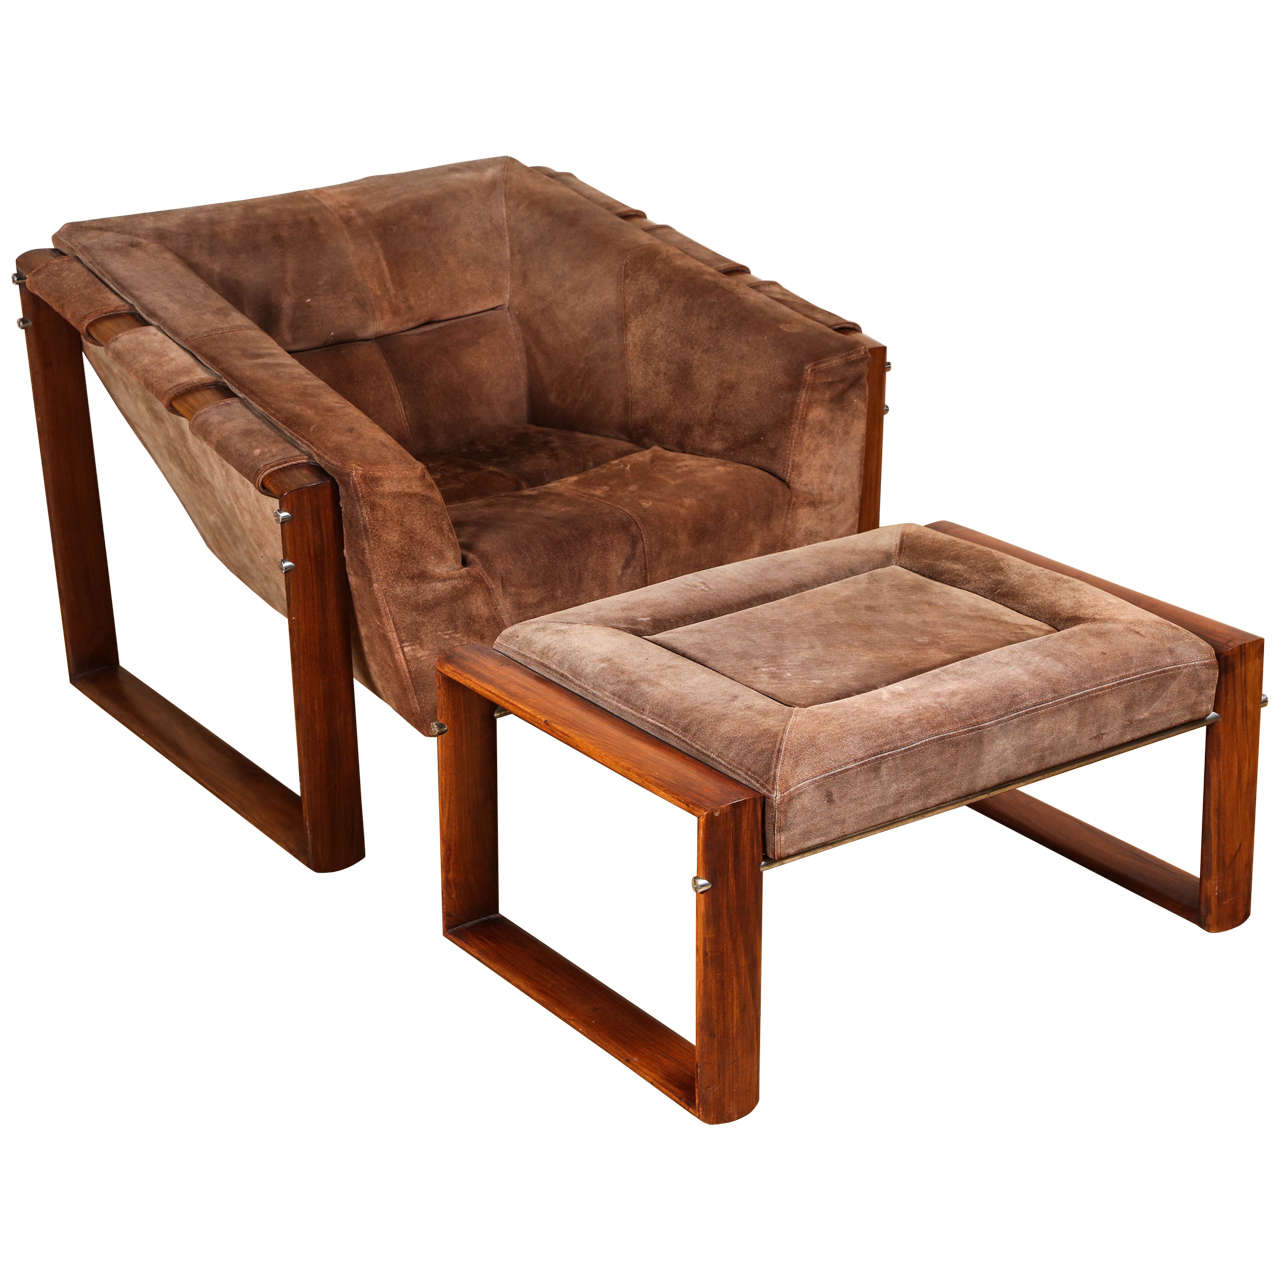 Rosewood and Suede Lounge Chair and Ottoman by Percival Lafer